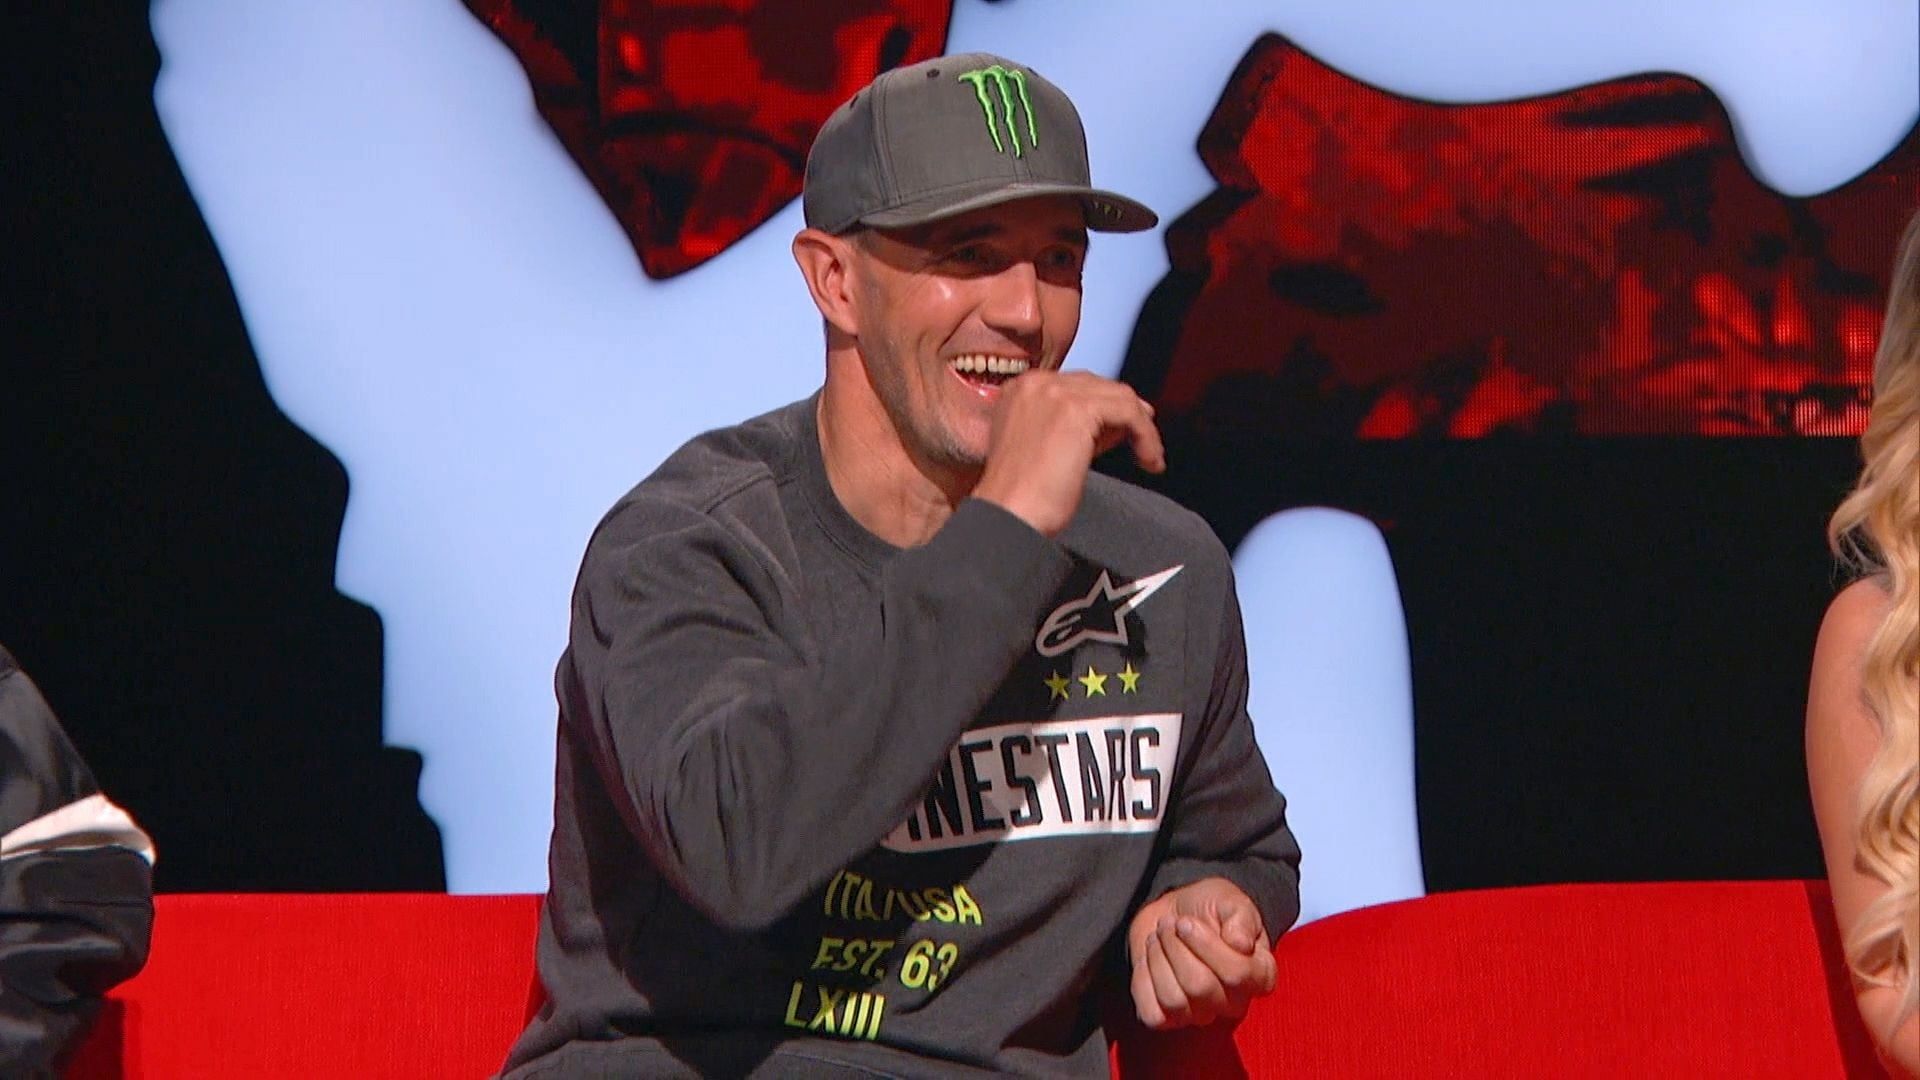 Ridiculousness background